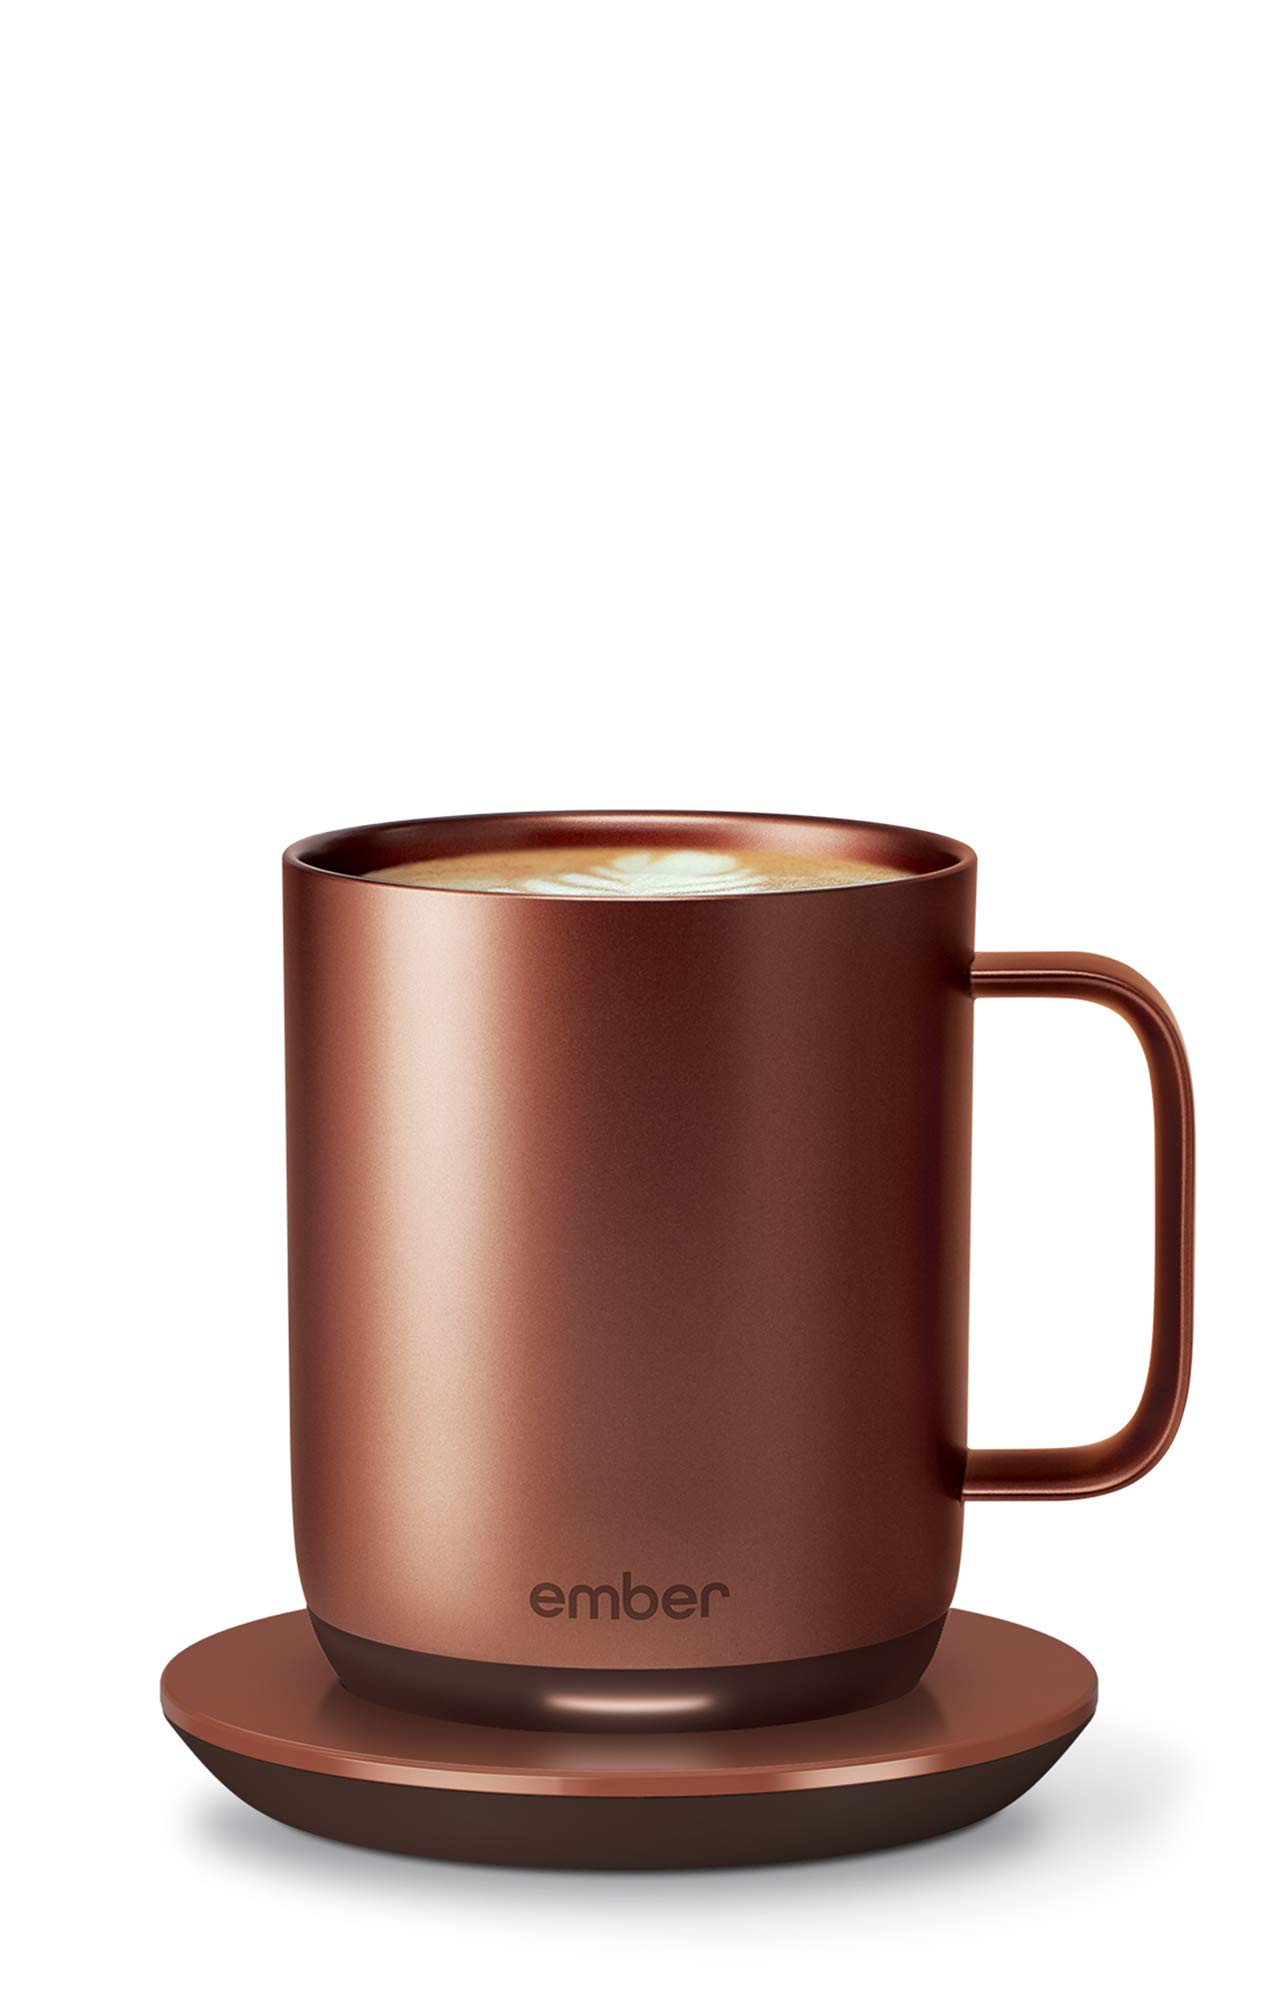 Ember Charging Coaster 2, Wireless Charging for Use with Ember Temperature Control Smart Mug, Copper